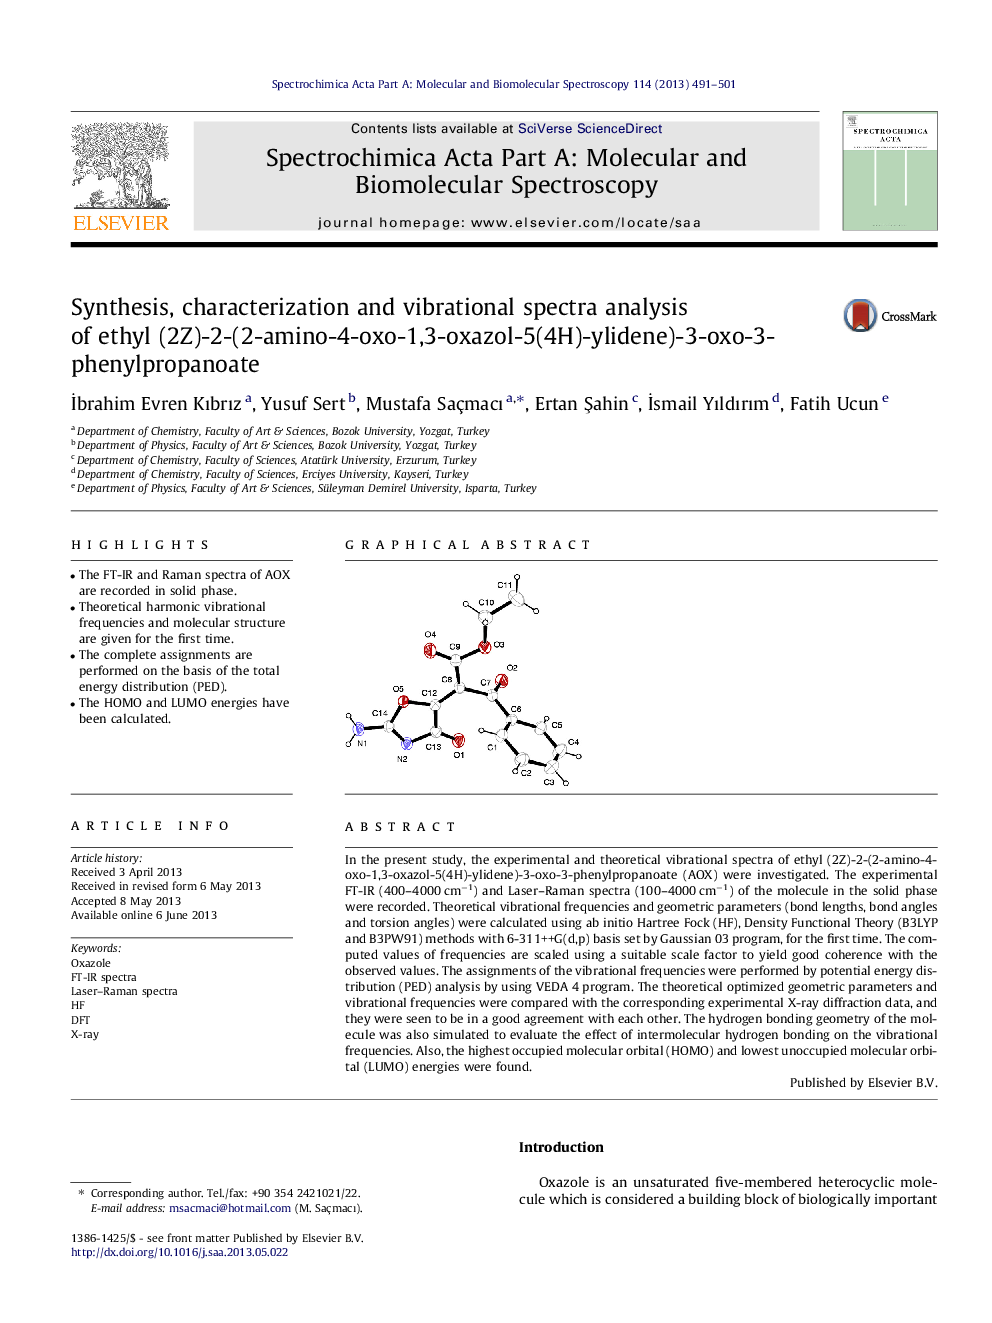 Synthesis, characterization and vibrational spectra analysis of ethyl (2Z)-2-(2-amino-4-oxo-1,3-oxazol-5(4H)-ylidene)-3-oxo-3-phenylpropanoate